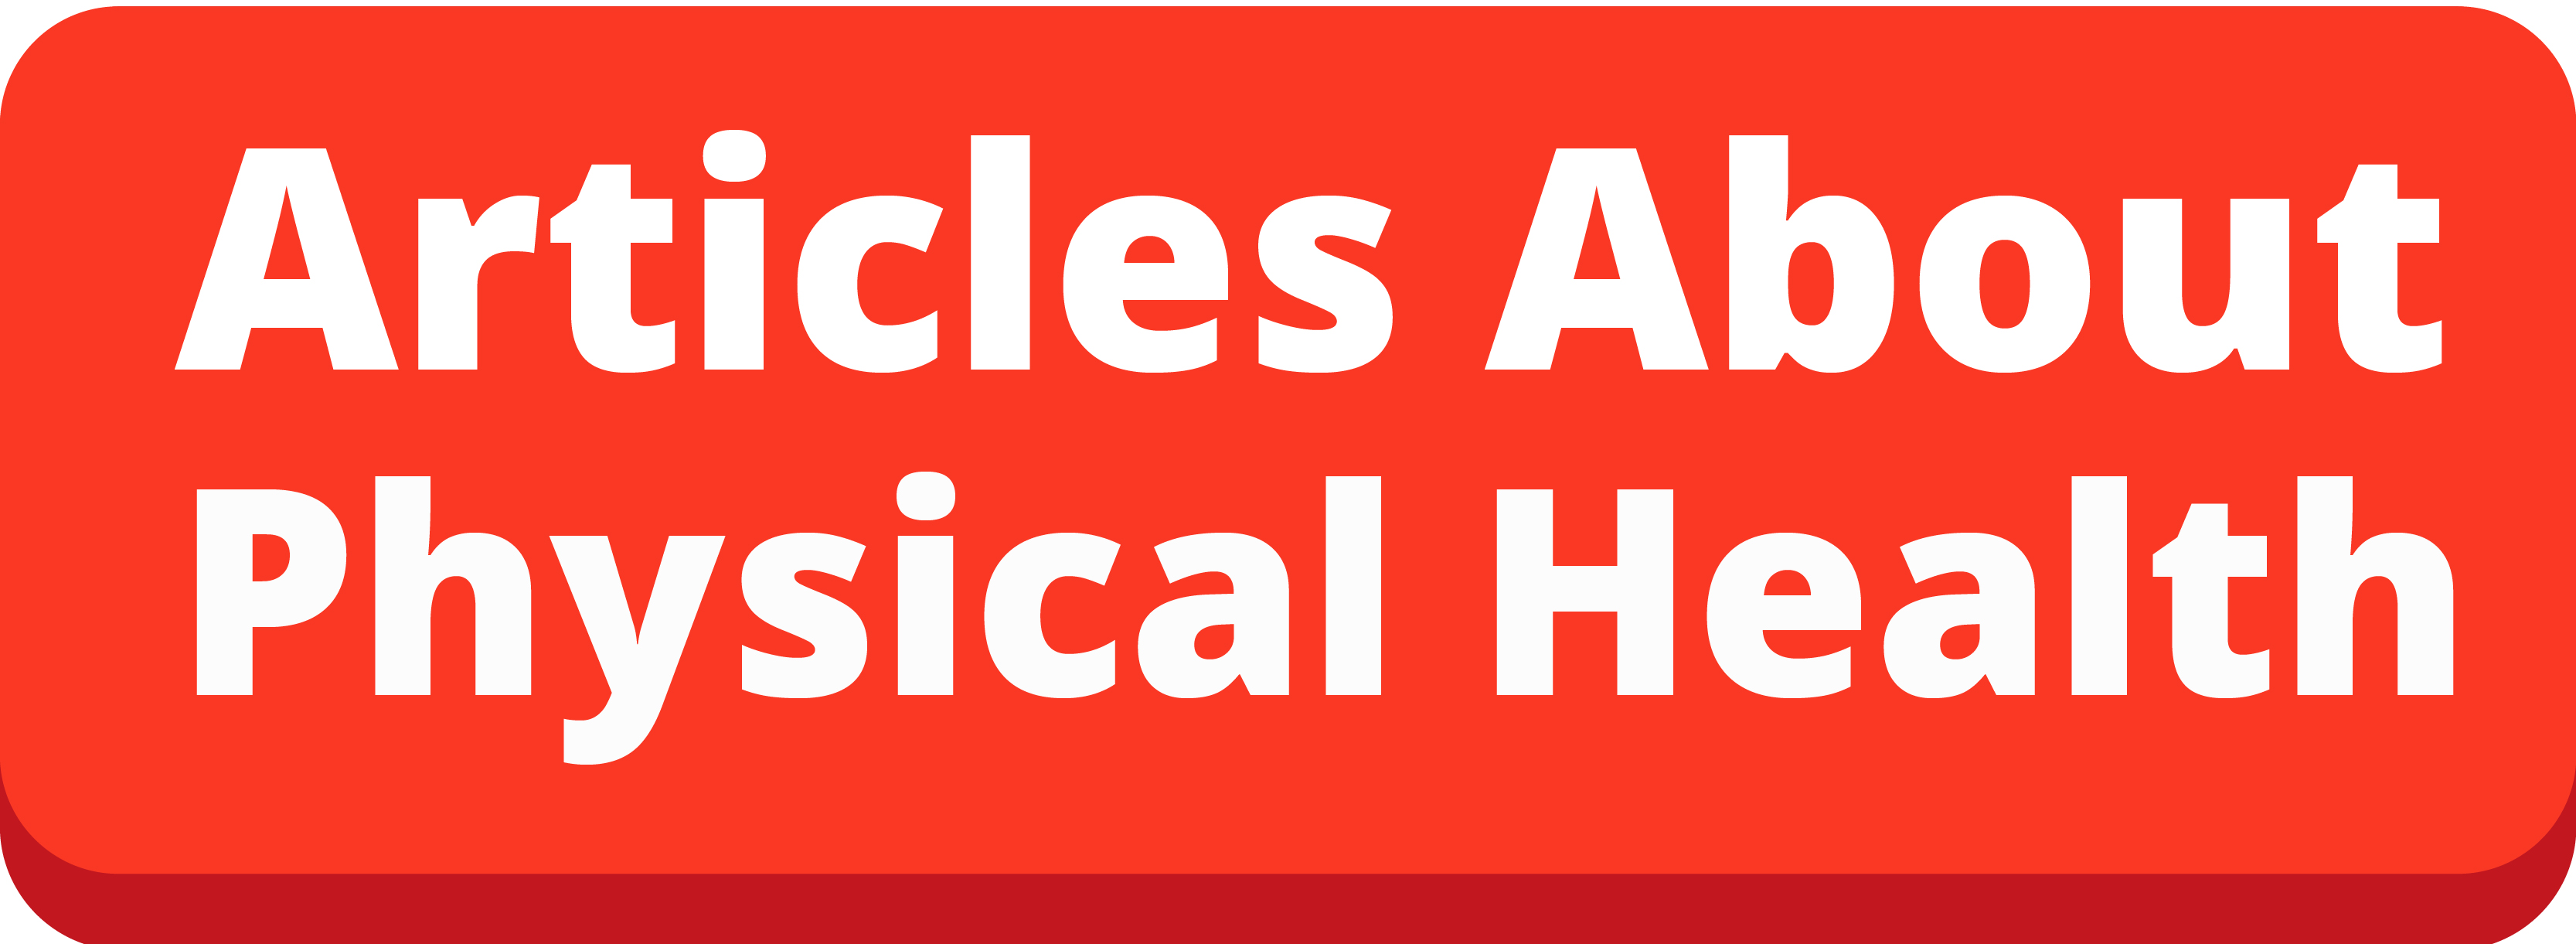 Articles About Physical Health